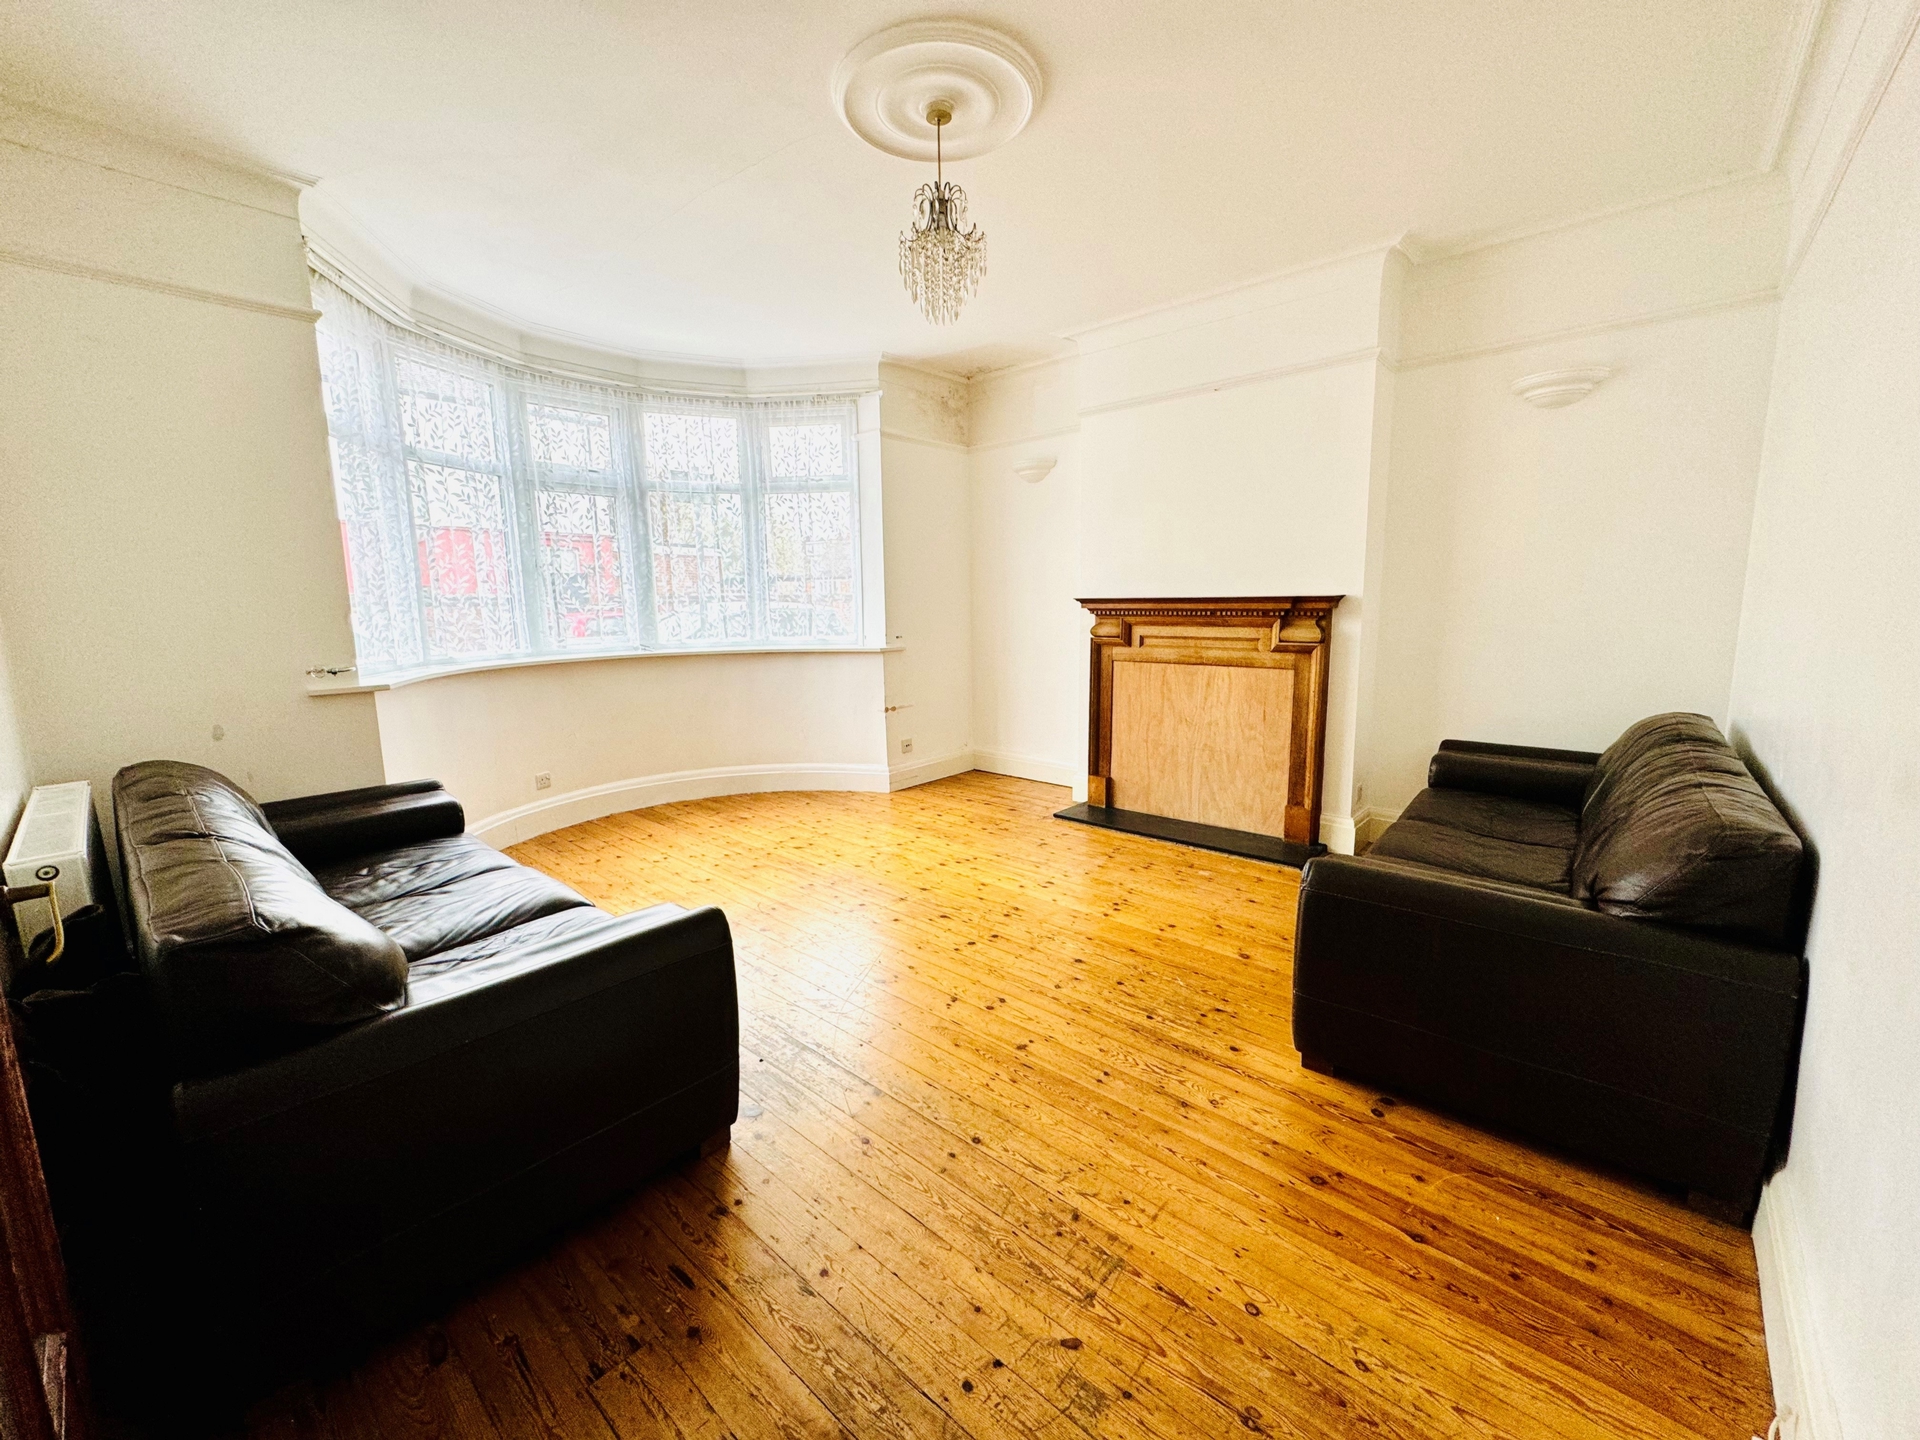 4 Bedroom Flat to rent in Cricklewood, London, NW2